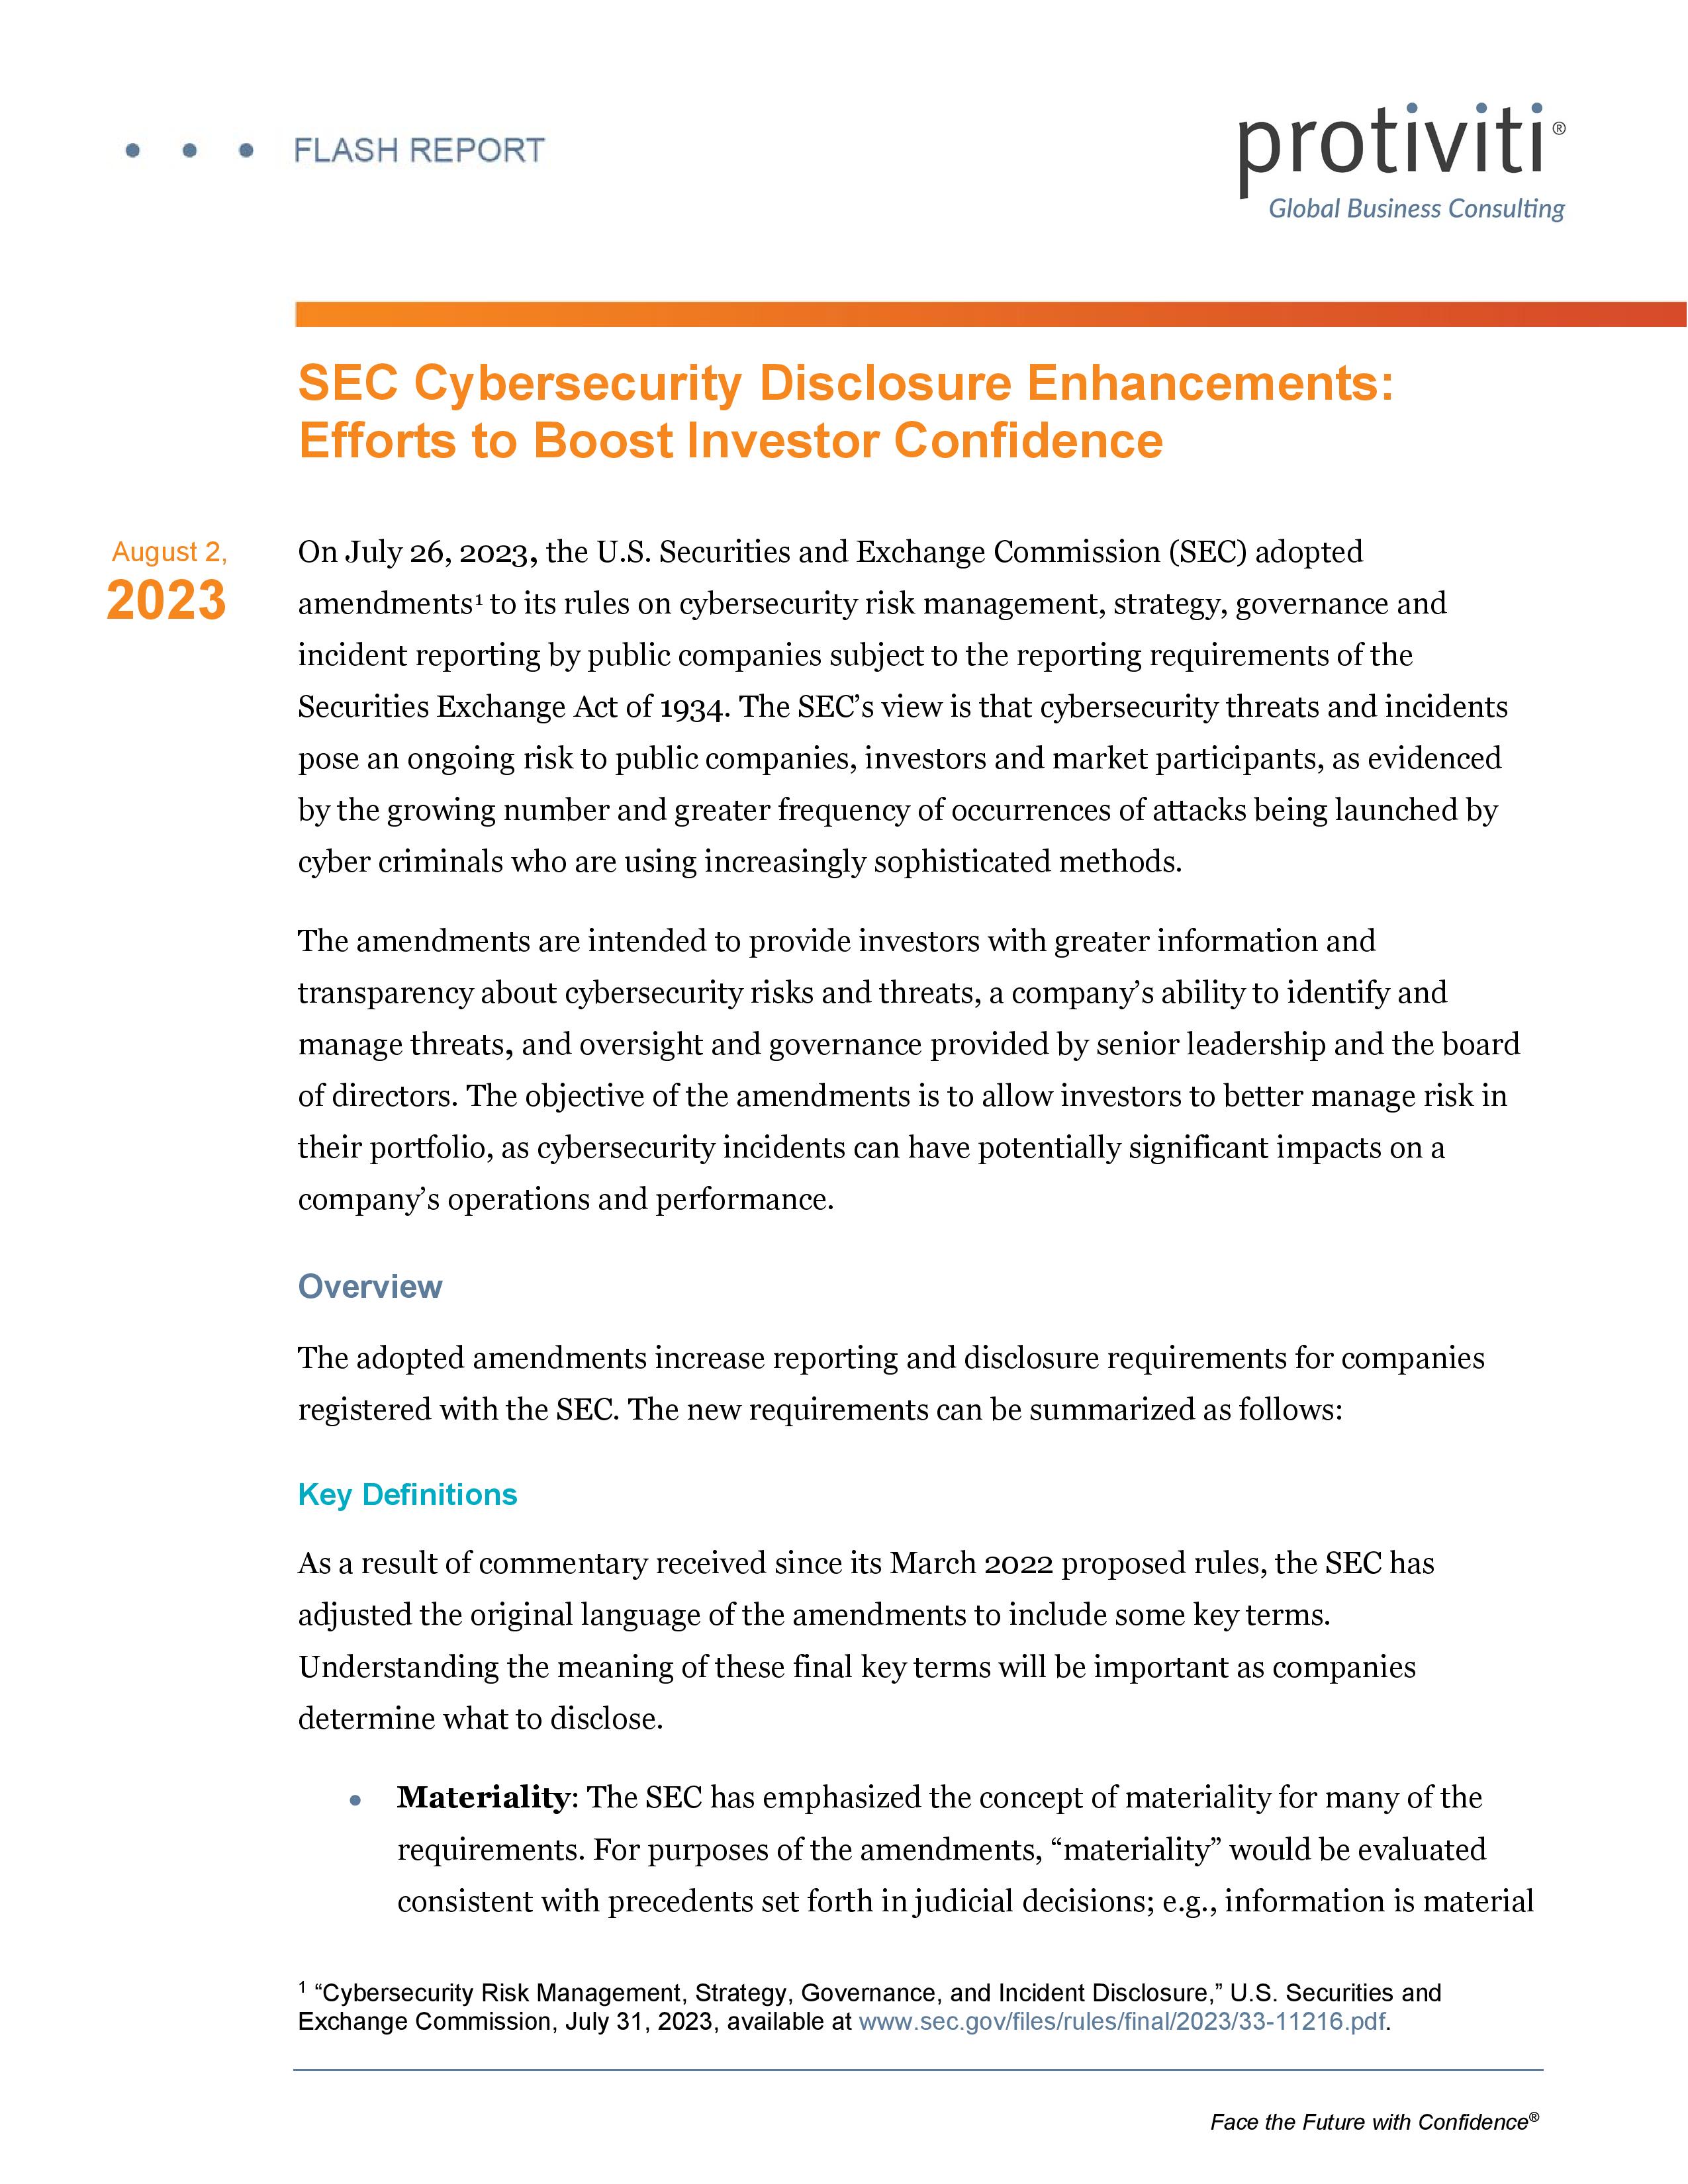 screenshot of the first page of SEC Cybersecurity Disclosure Enhancements Efforts to Boost Investor Confidence